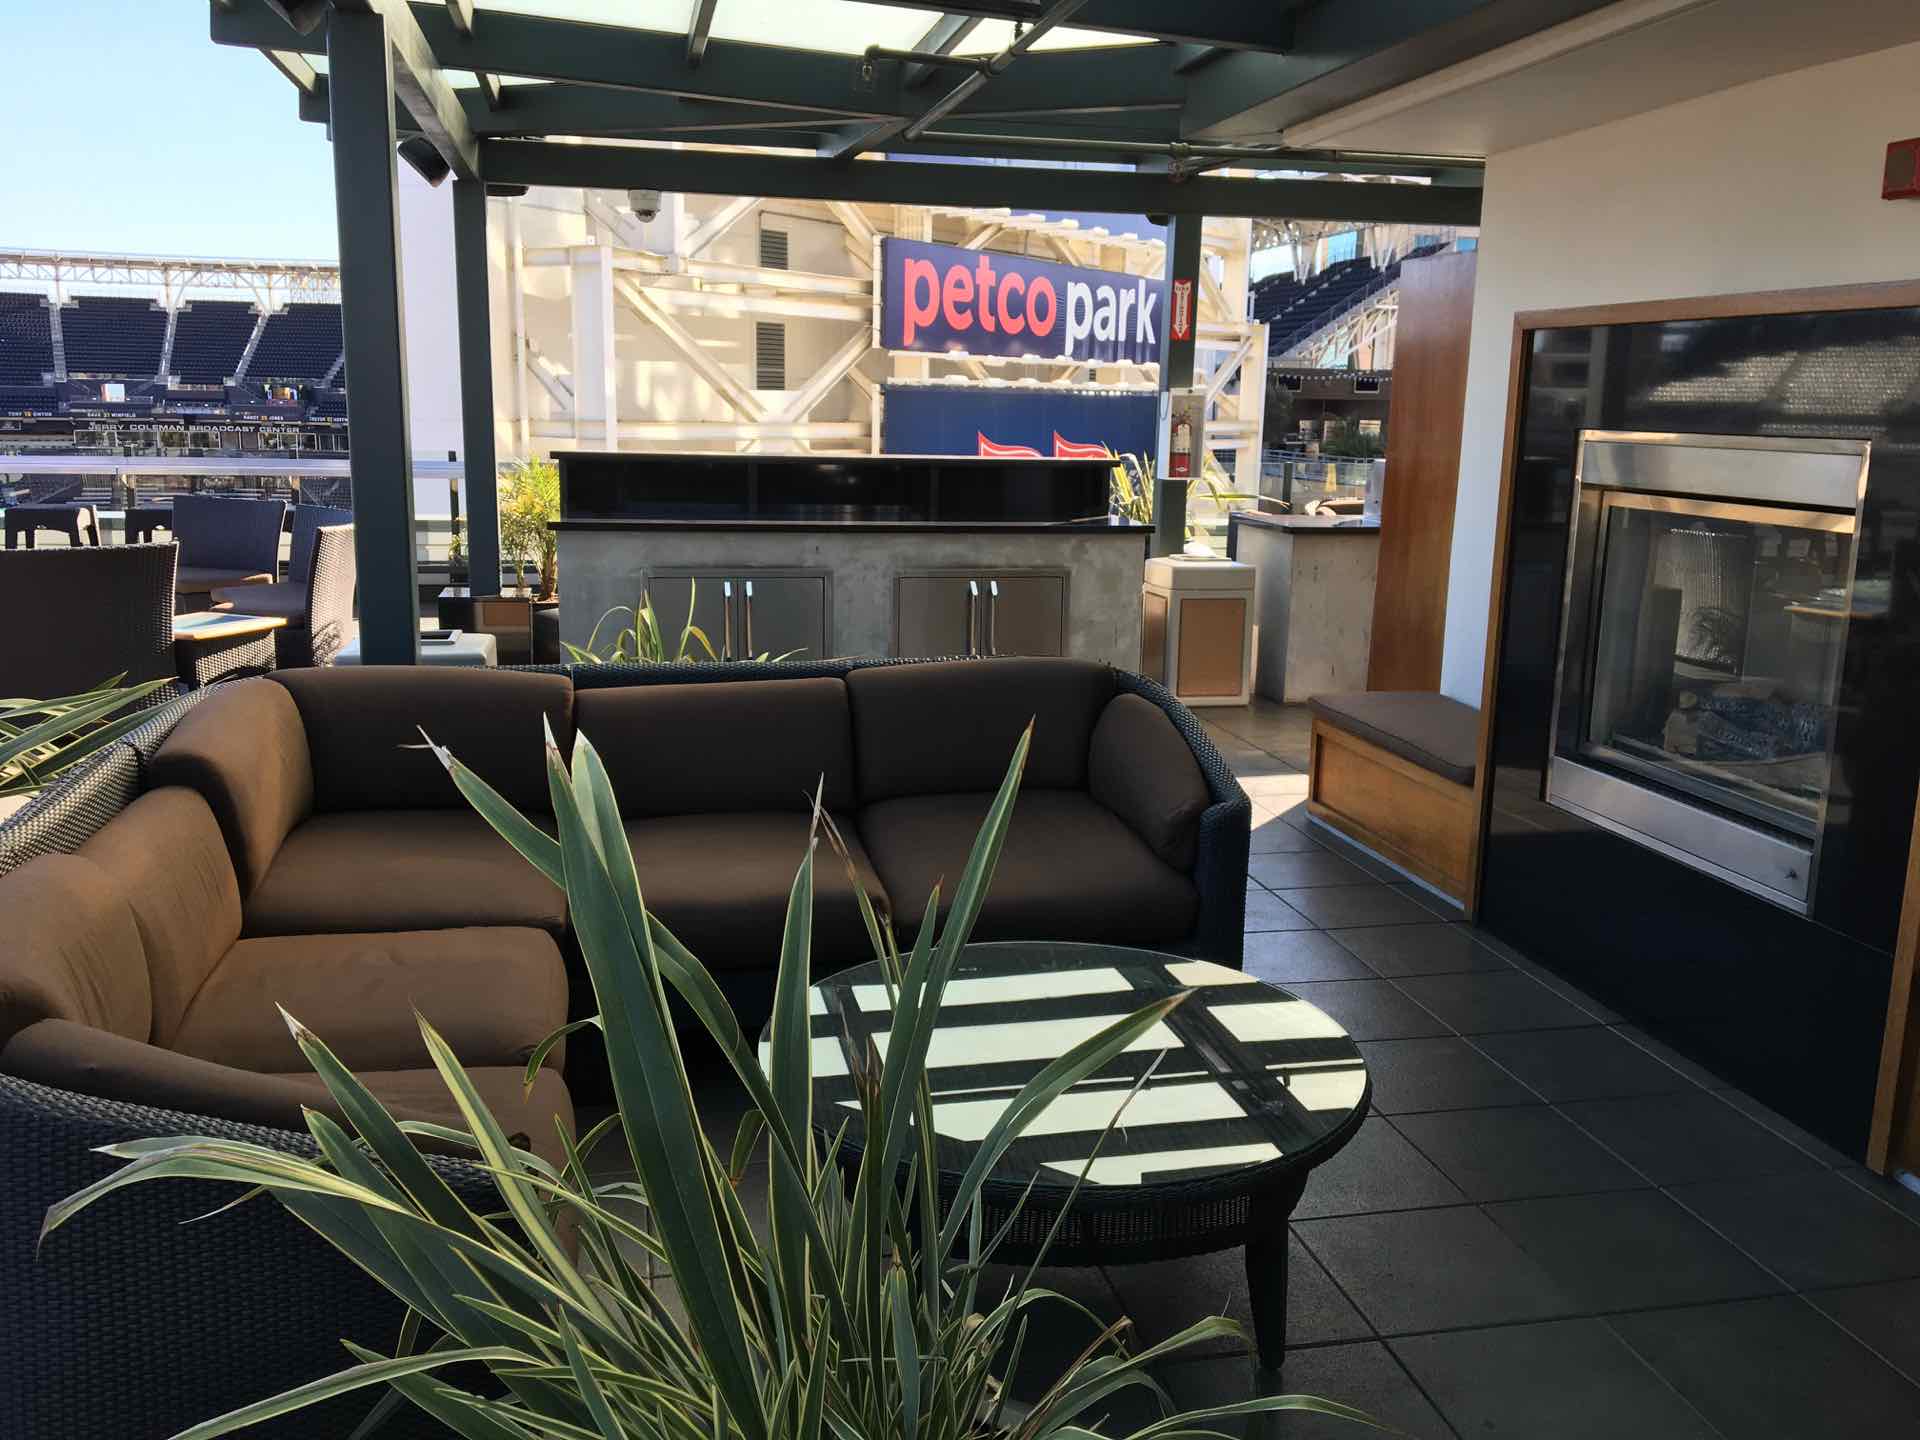 Seating area facing Petco Park in downtown San Diego East Village